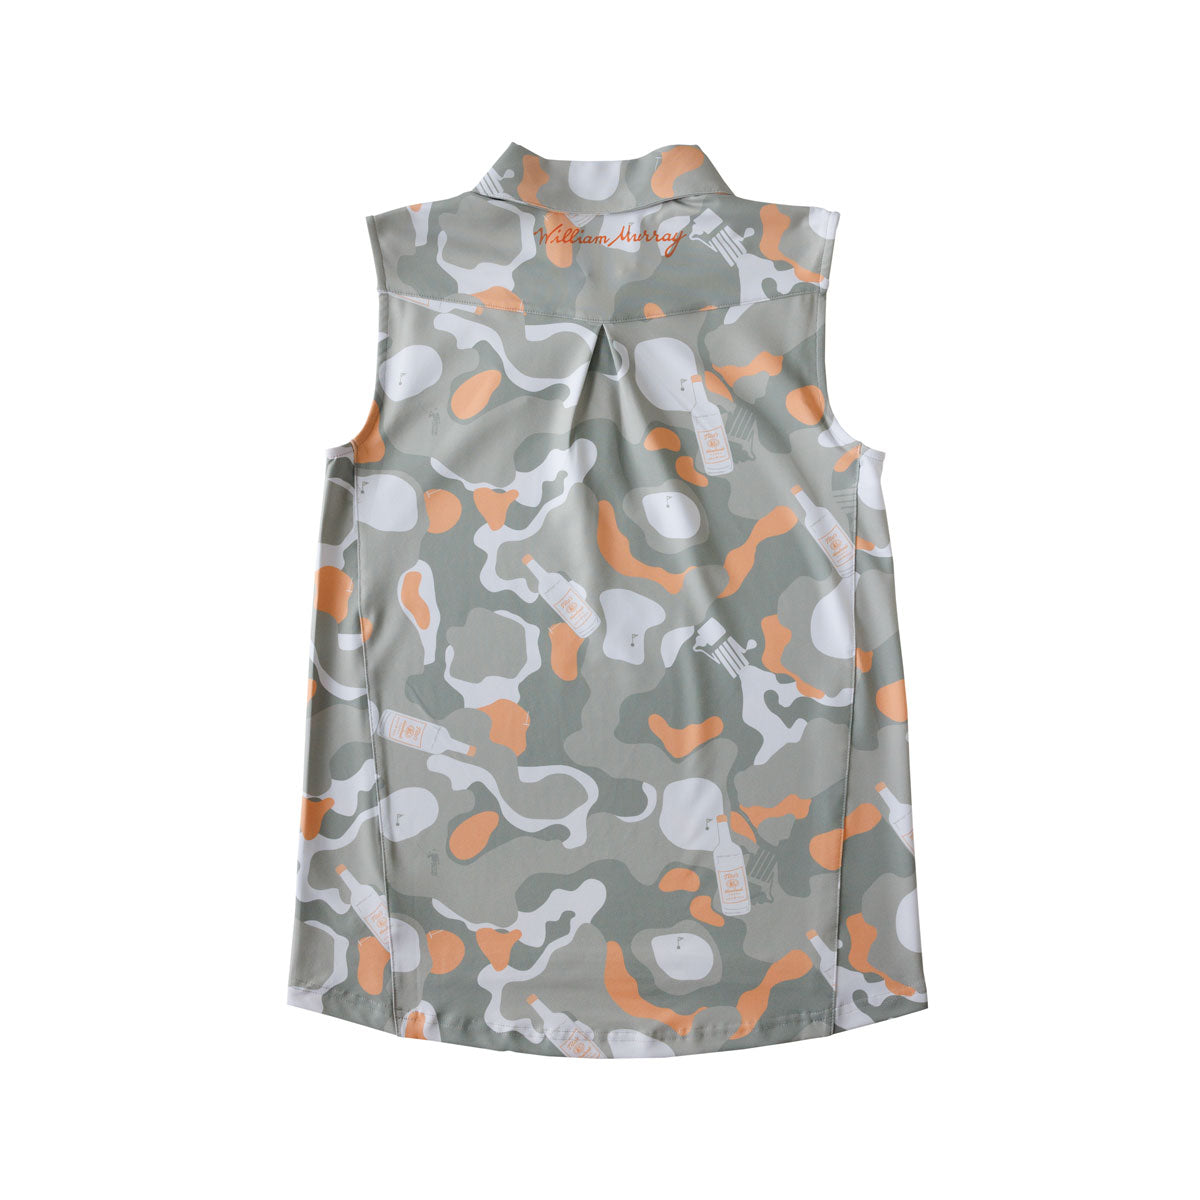 Back of gray and orange camouflage polo tank with Tito's Handmade Vodka bottle and pot still designs and William Murray wordmark